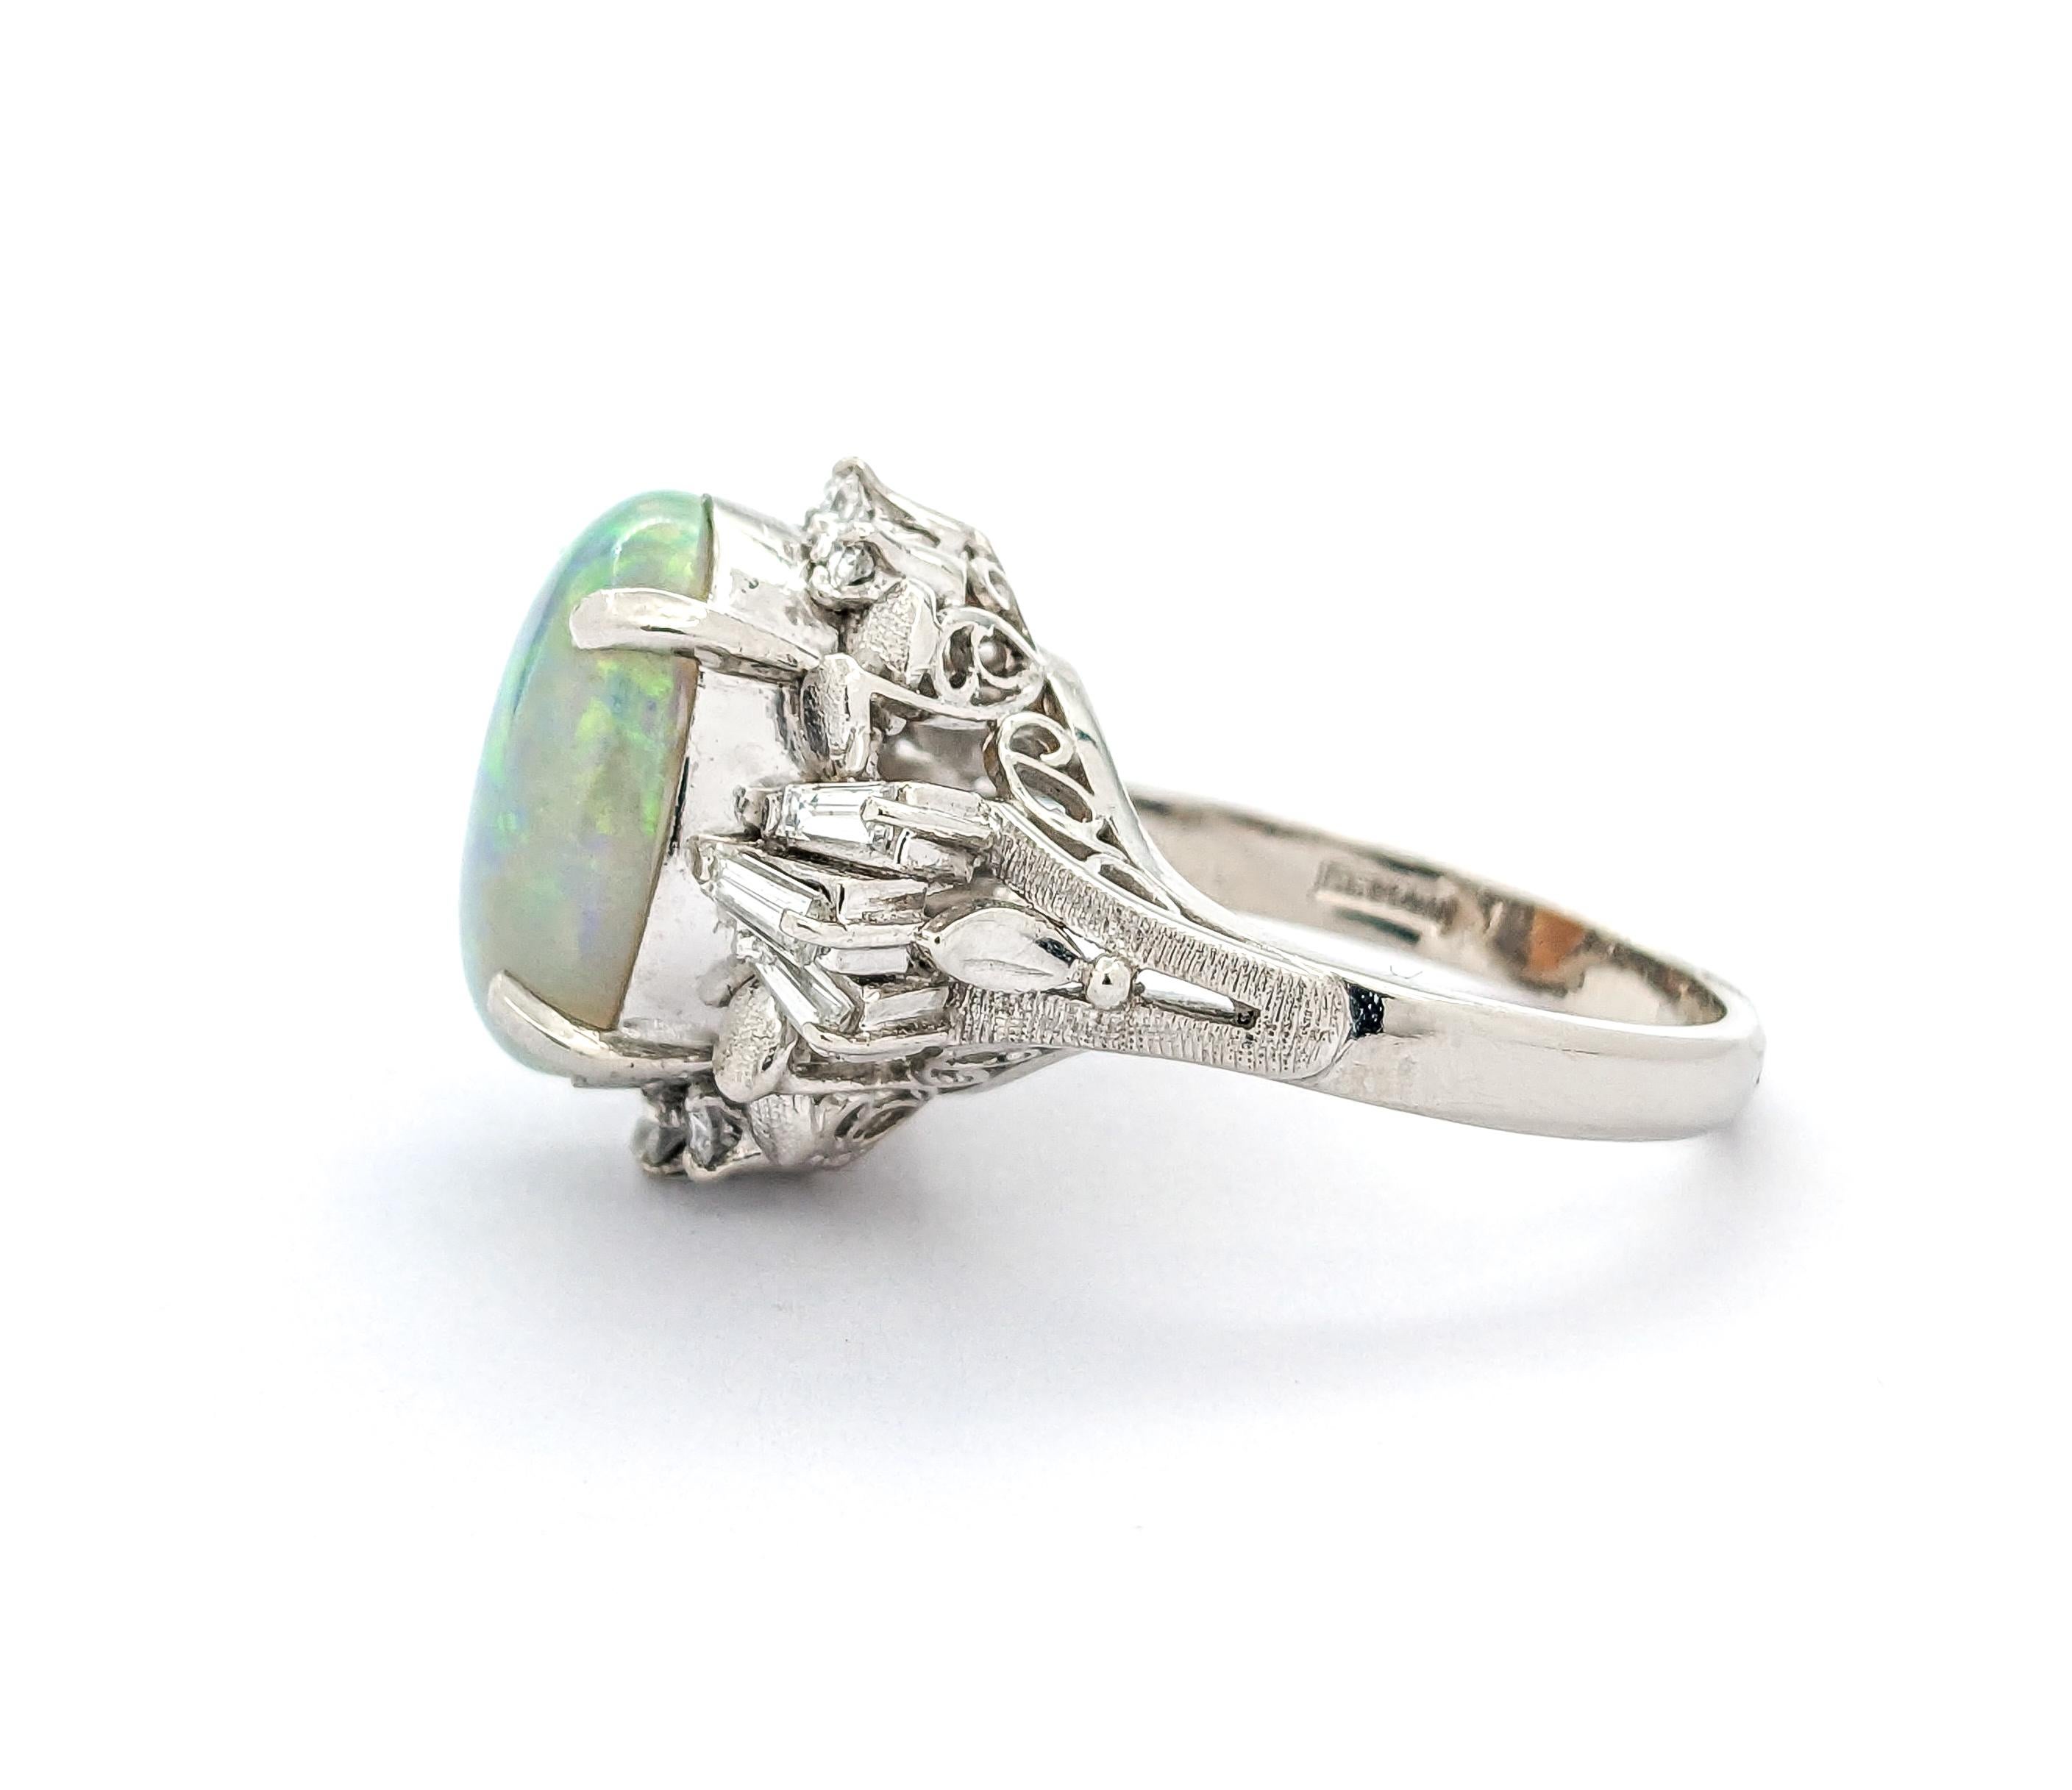 Colorful 6.03ct Opal & Diamond Ring in Platinum For Sale 3